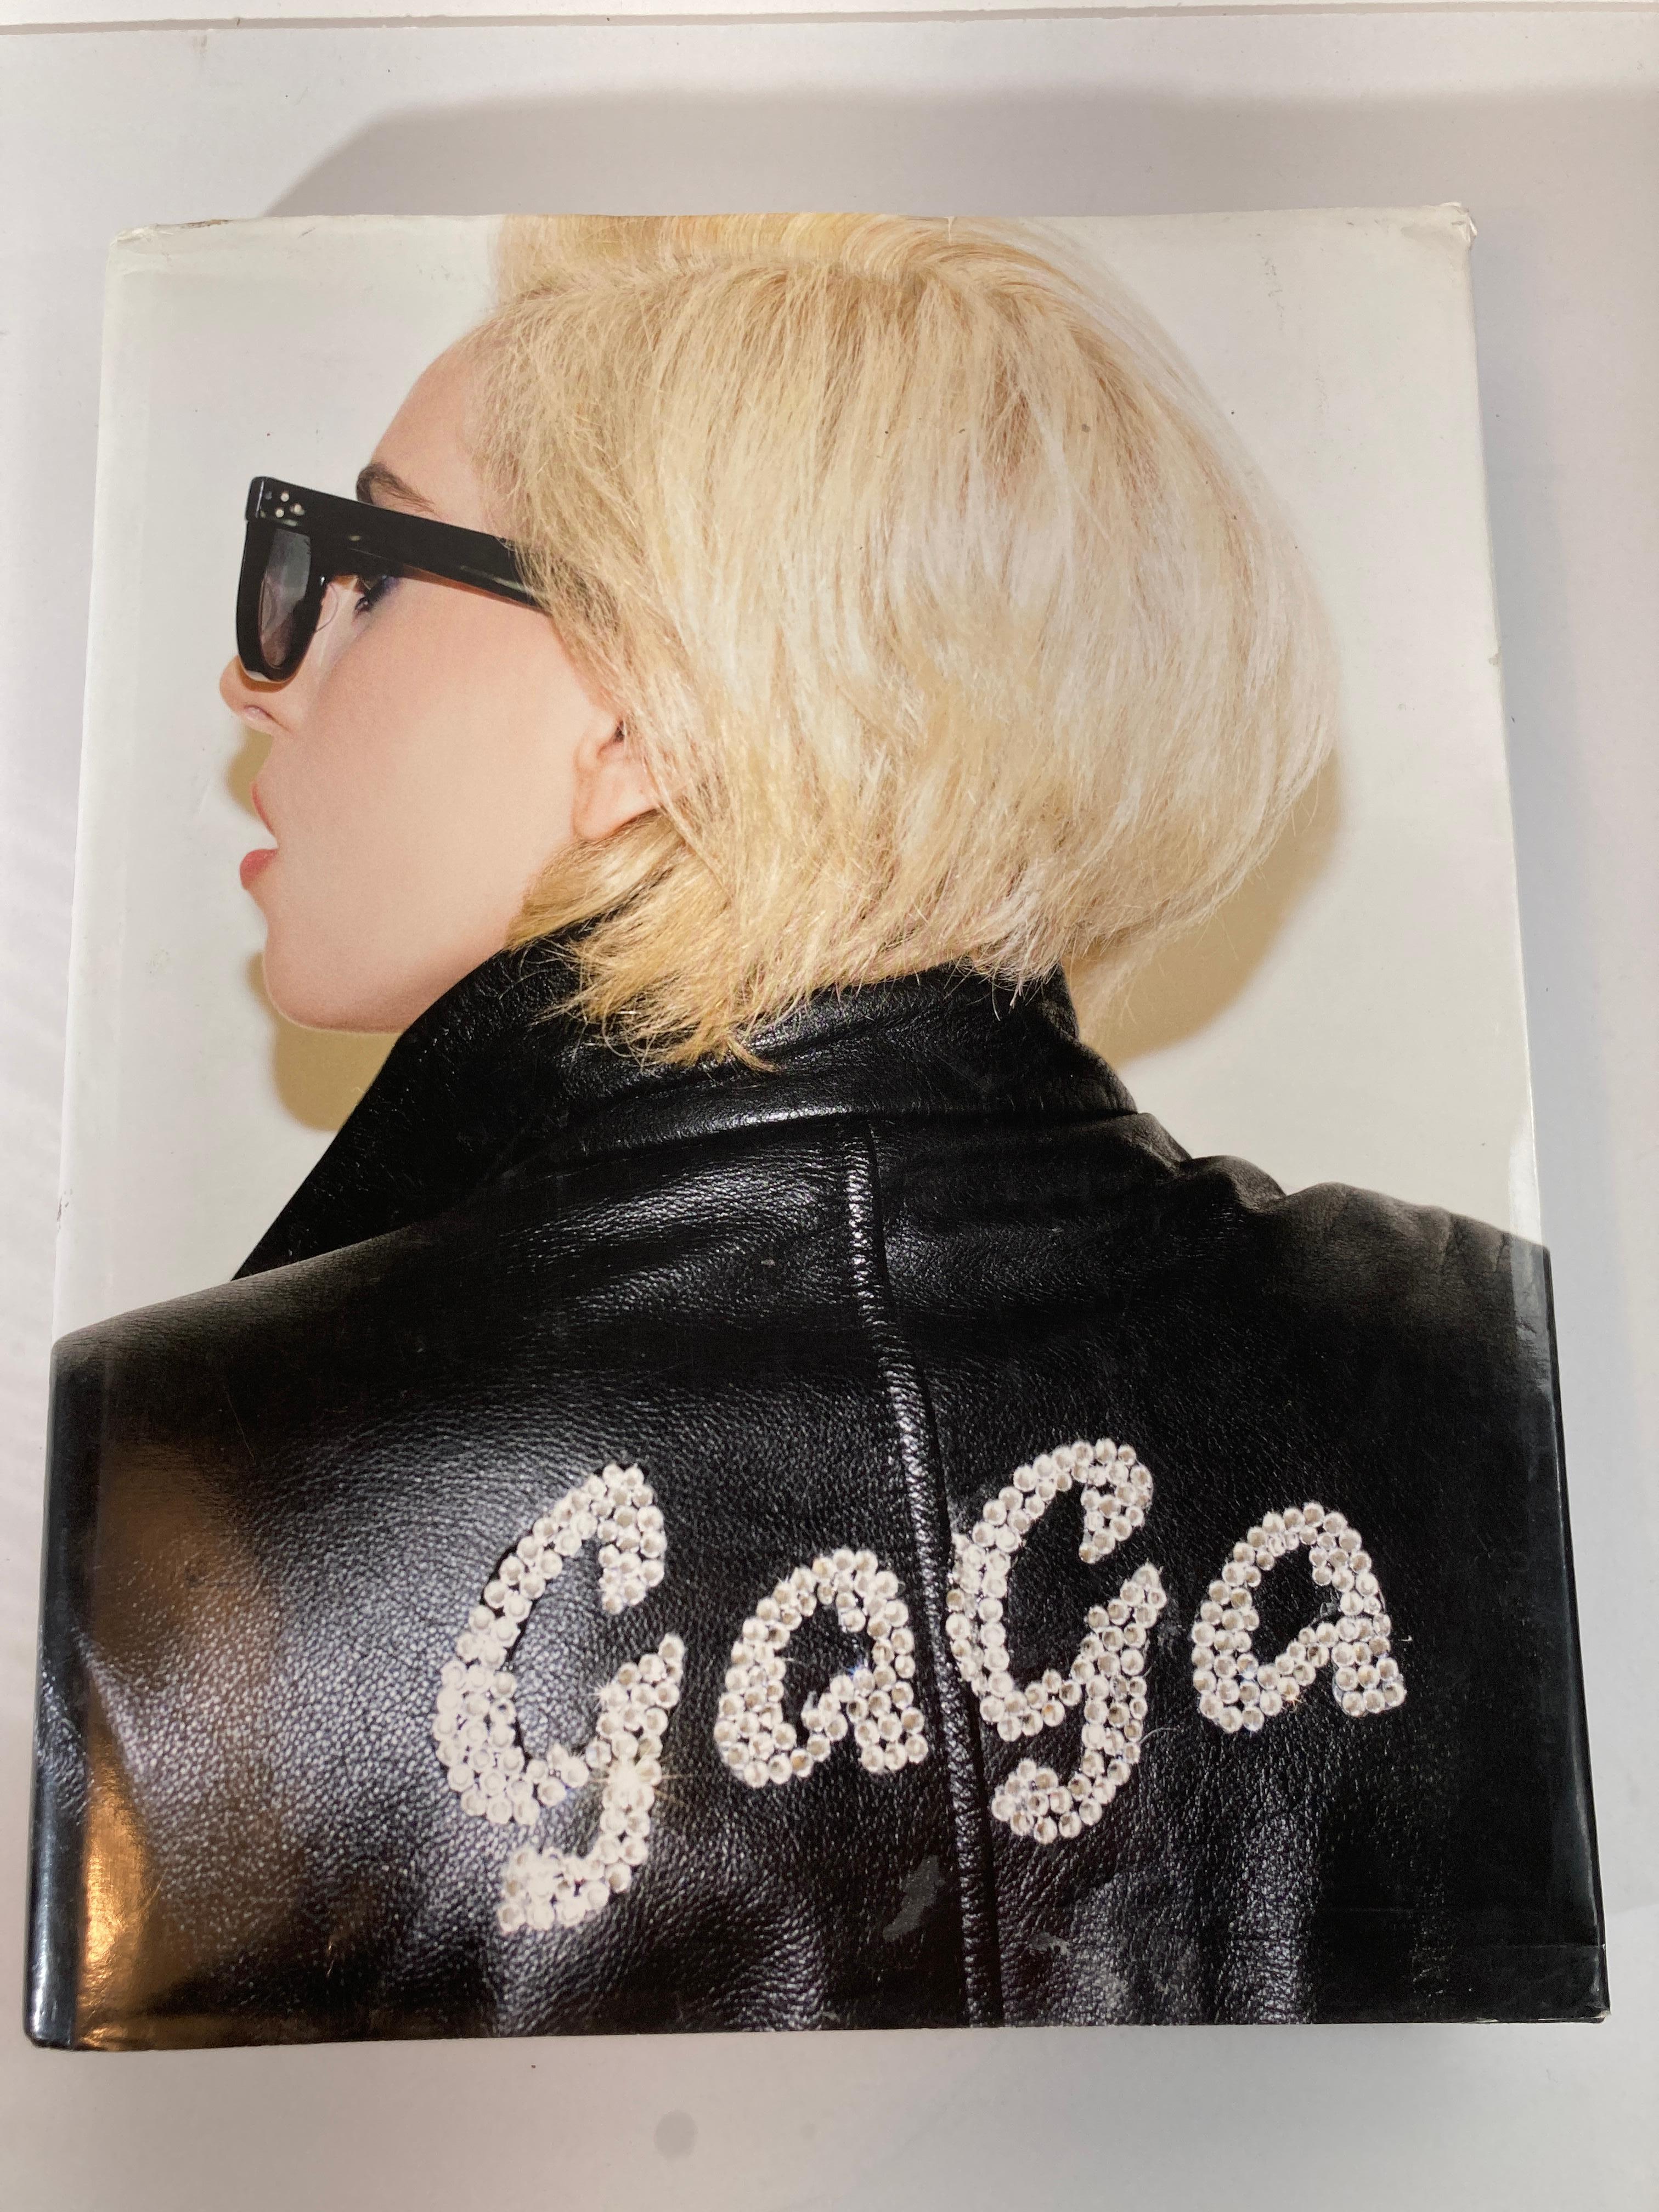 Lady Gaga X Terry Richardson large hardcover book.
Large Print, November 22, 2011
About the Author
Lady Gaga came to prominence following the release of her debut studio album The Fame (2008), which included the hits 